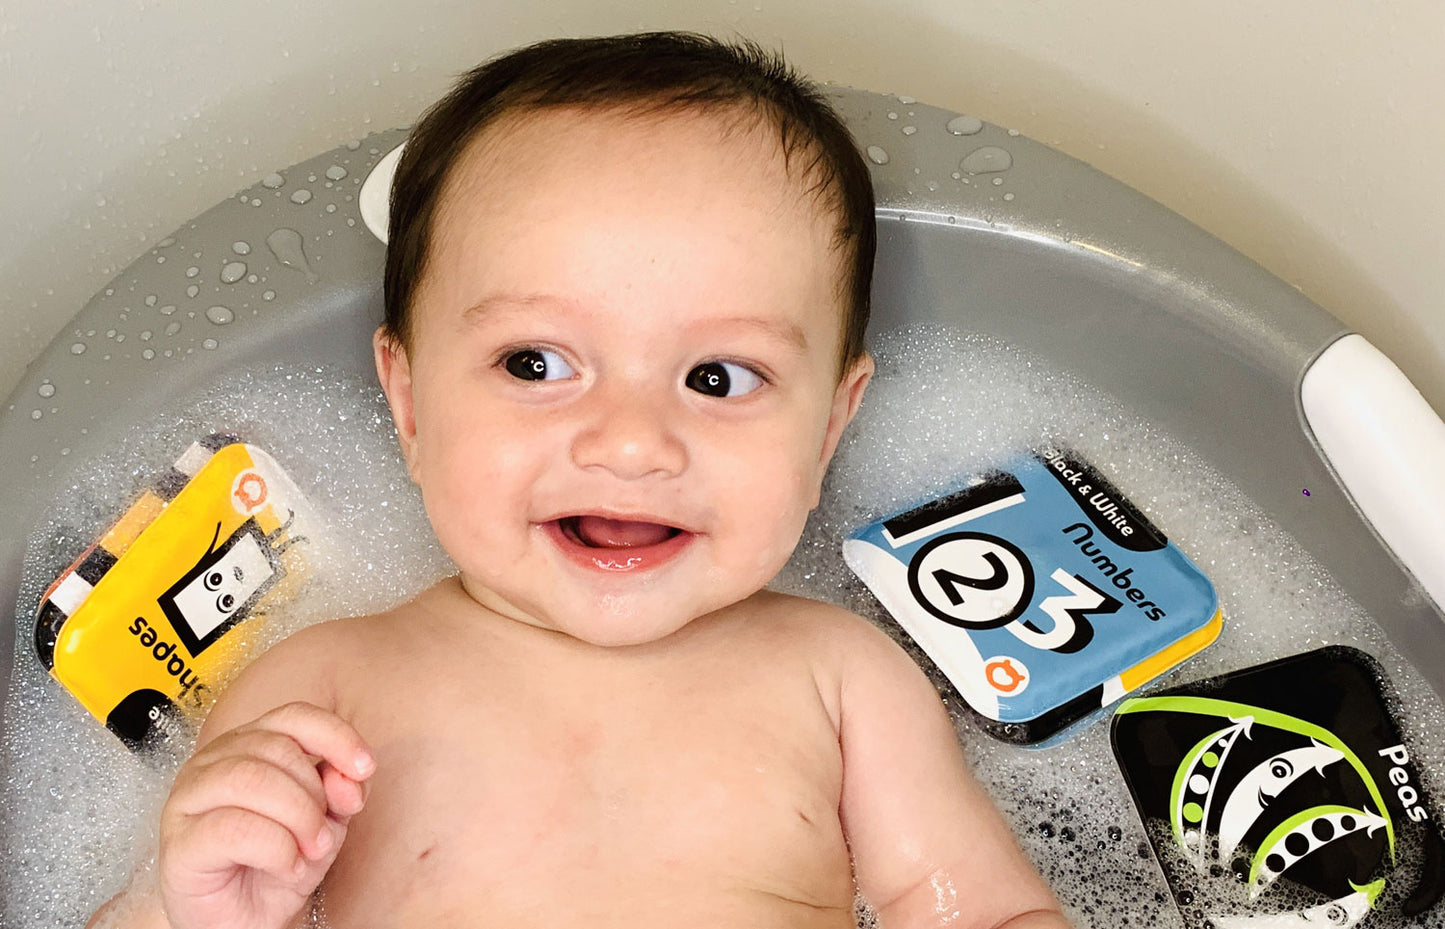 Our new Black & White bath books are selected for best bath toys for babies!